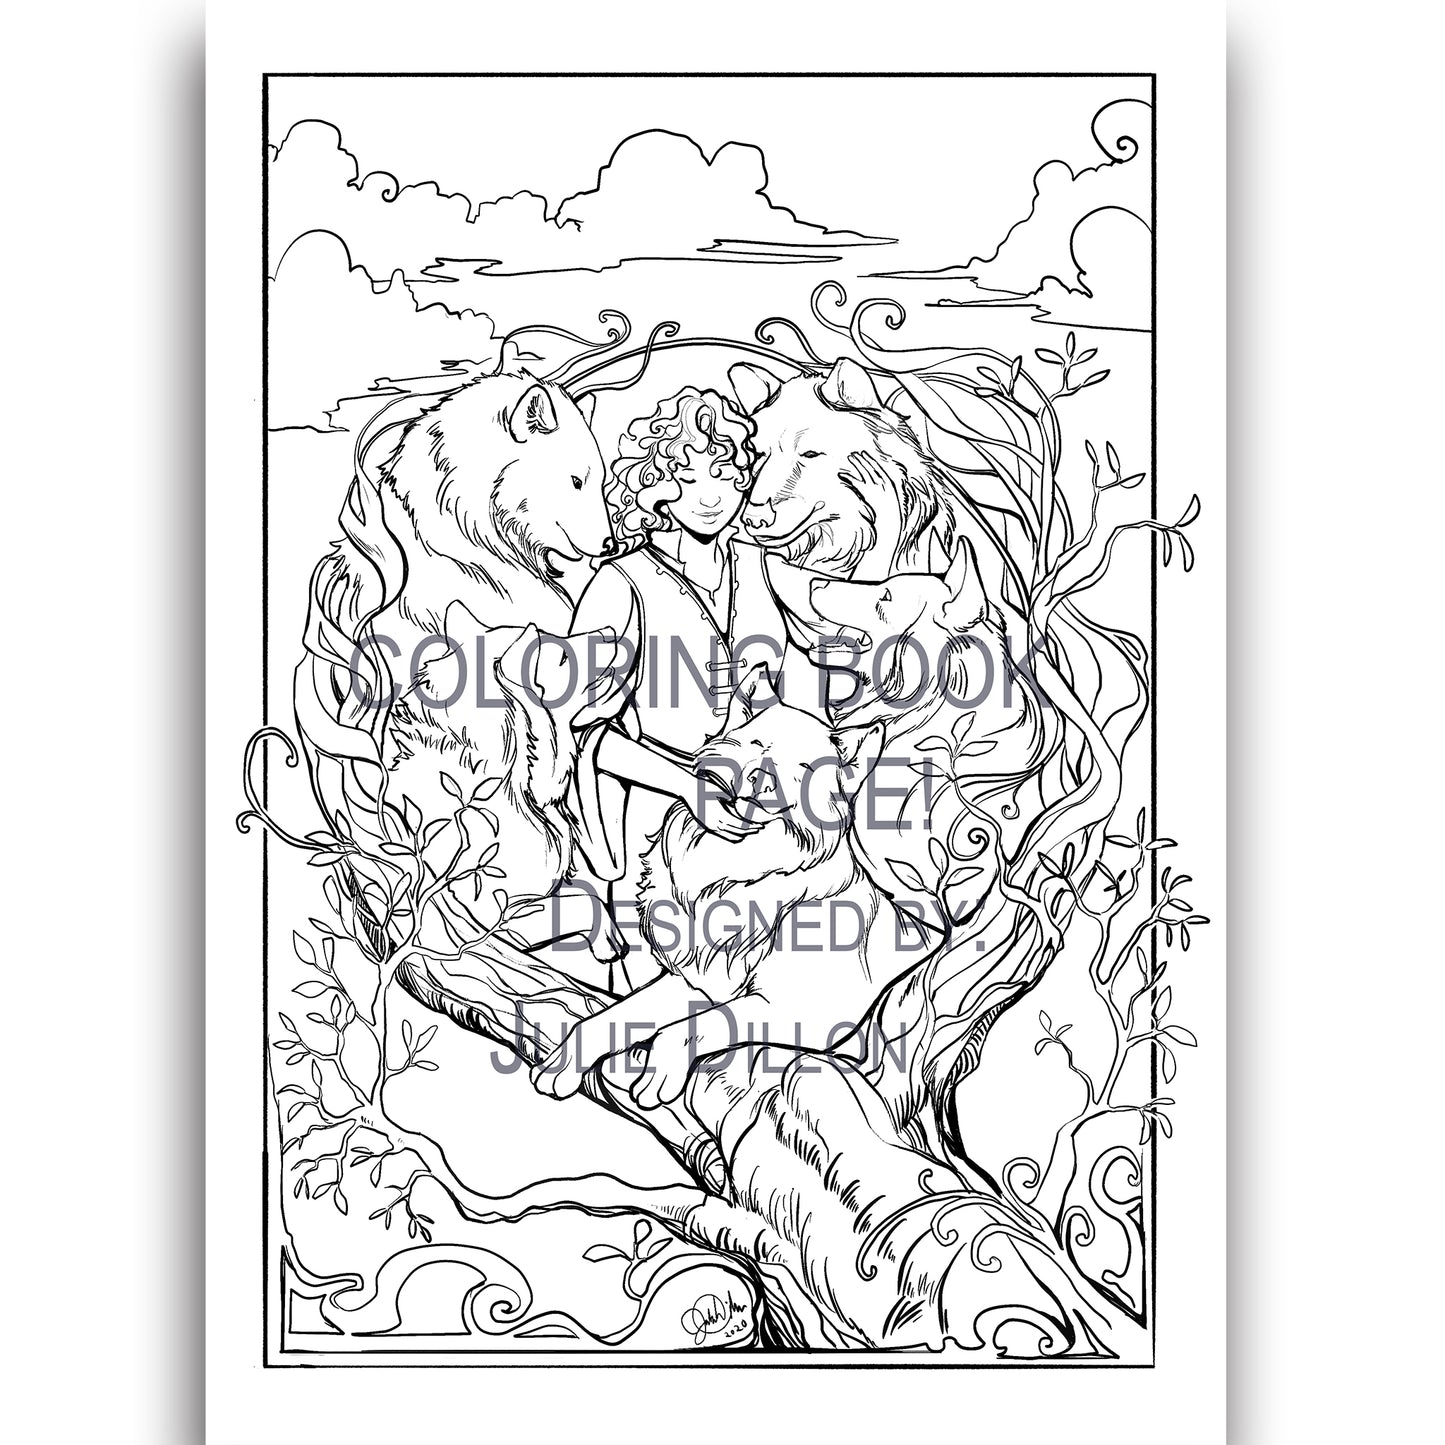 Black and white coloring book page of Daine surrounded by her wolf pack. All of them are surrounded by growing, entwining branches. Watermark reads: "Coloring book page! Designed by: Julie Dillon."